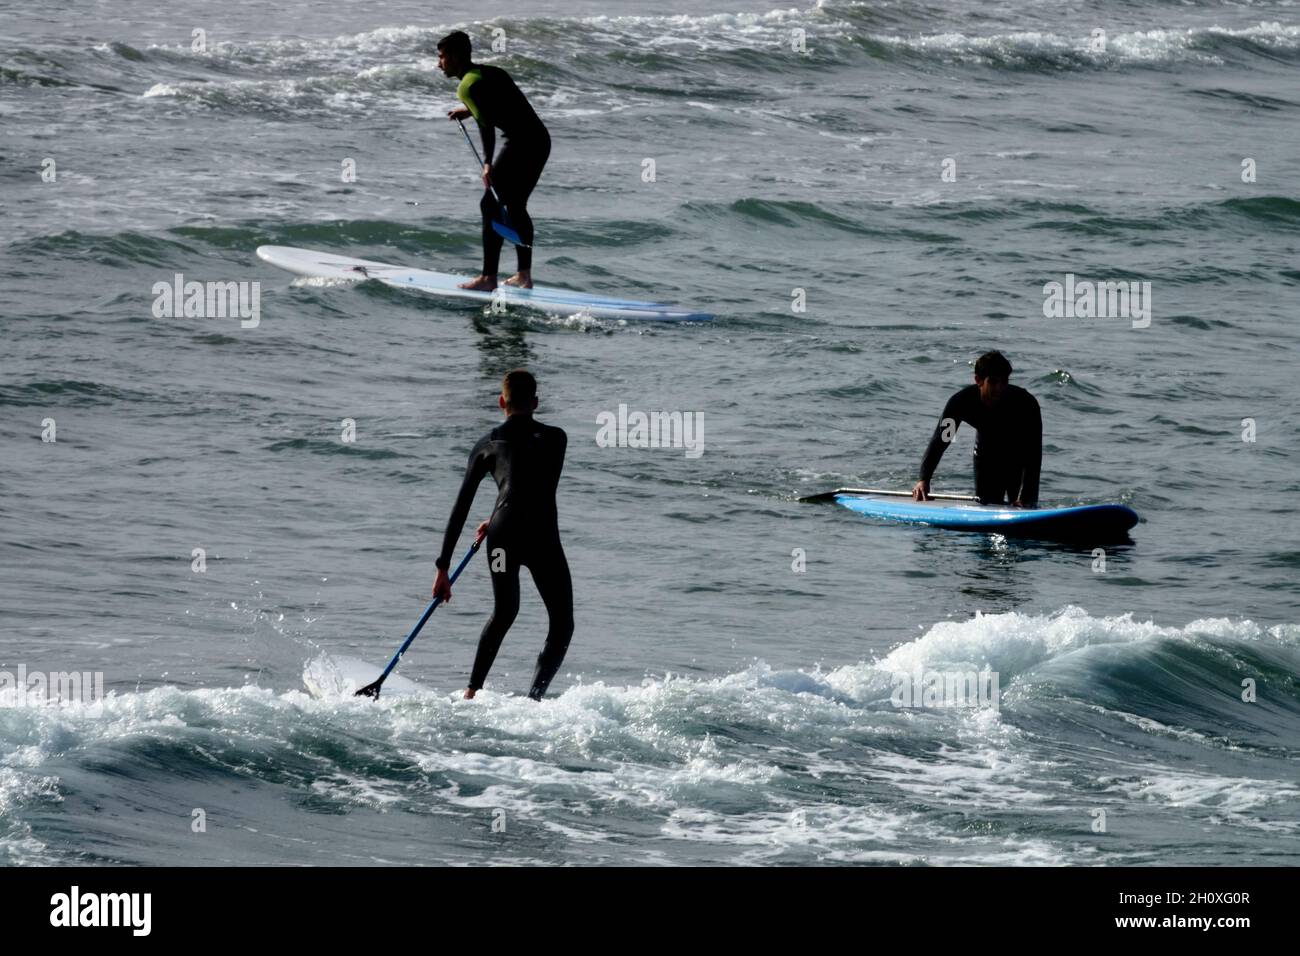 Stand Up Paddle Board, Paddle Boarding Sea Stockfoto